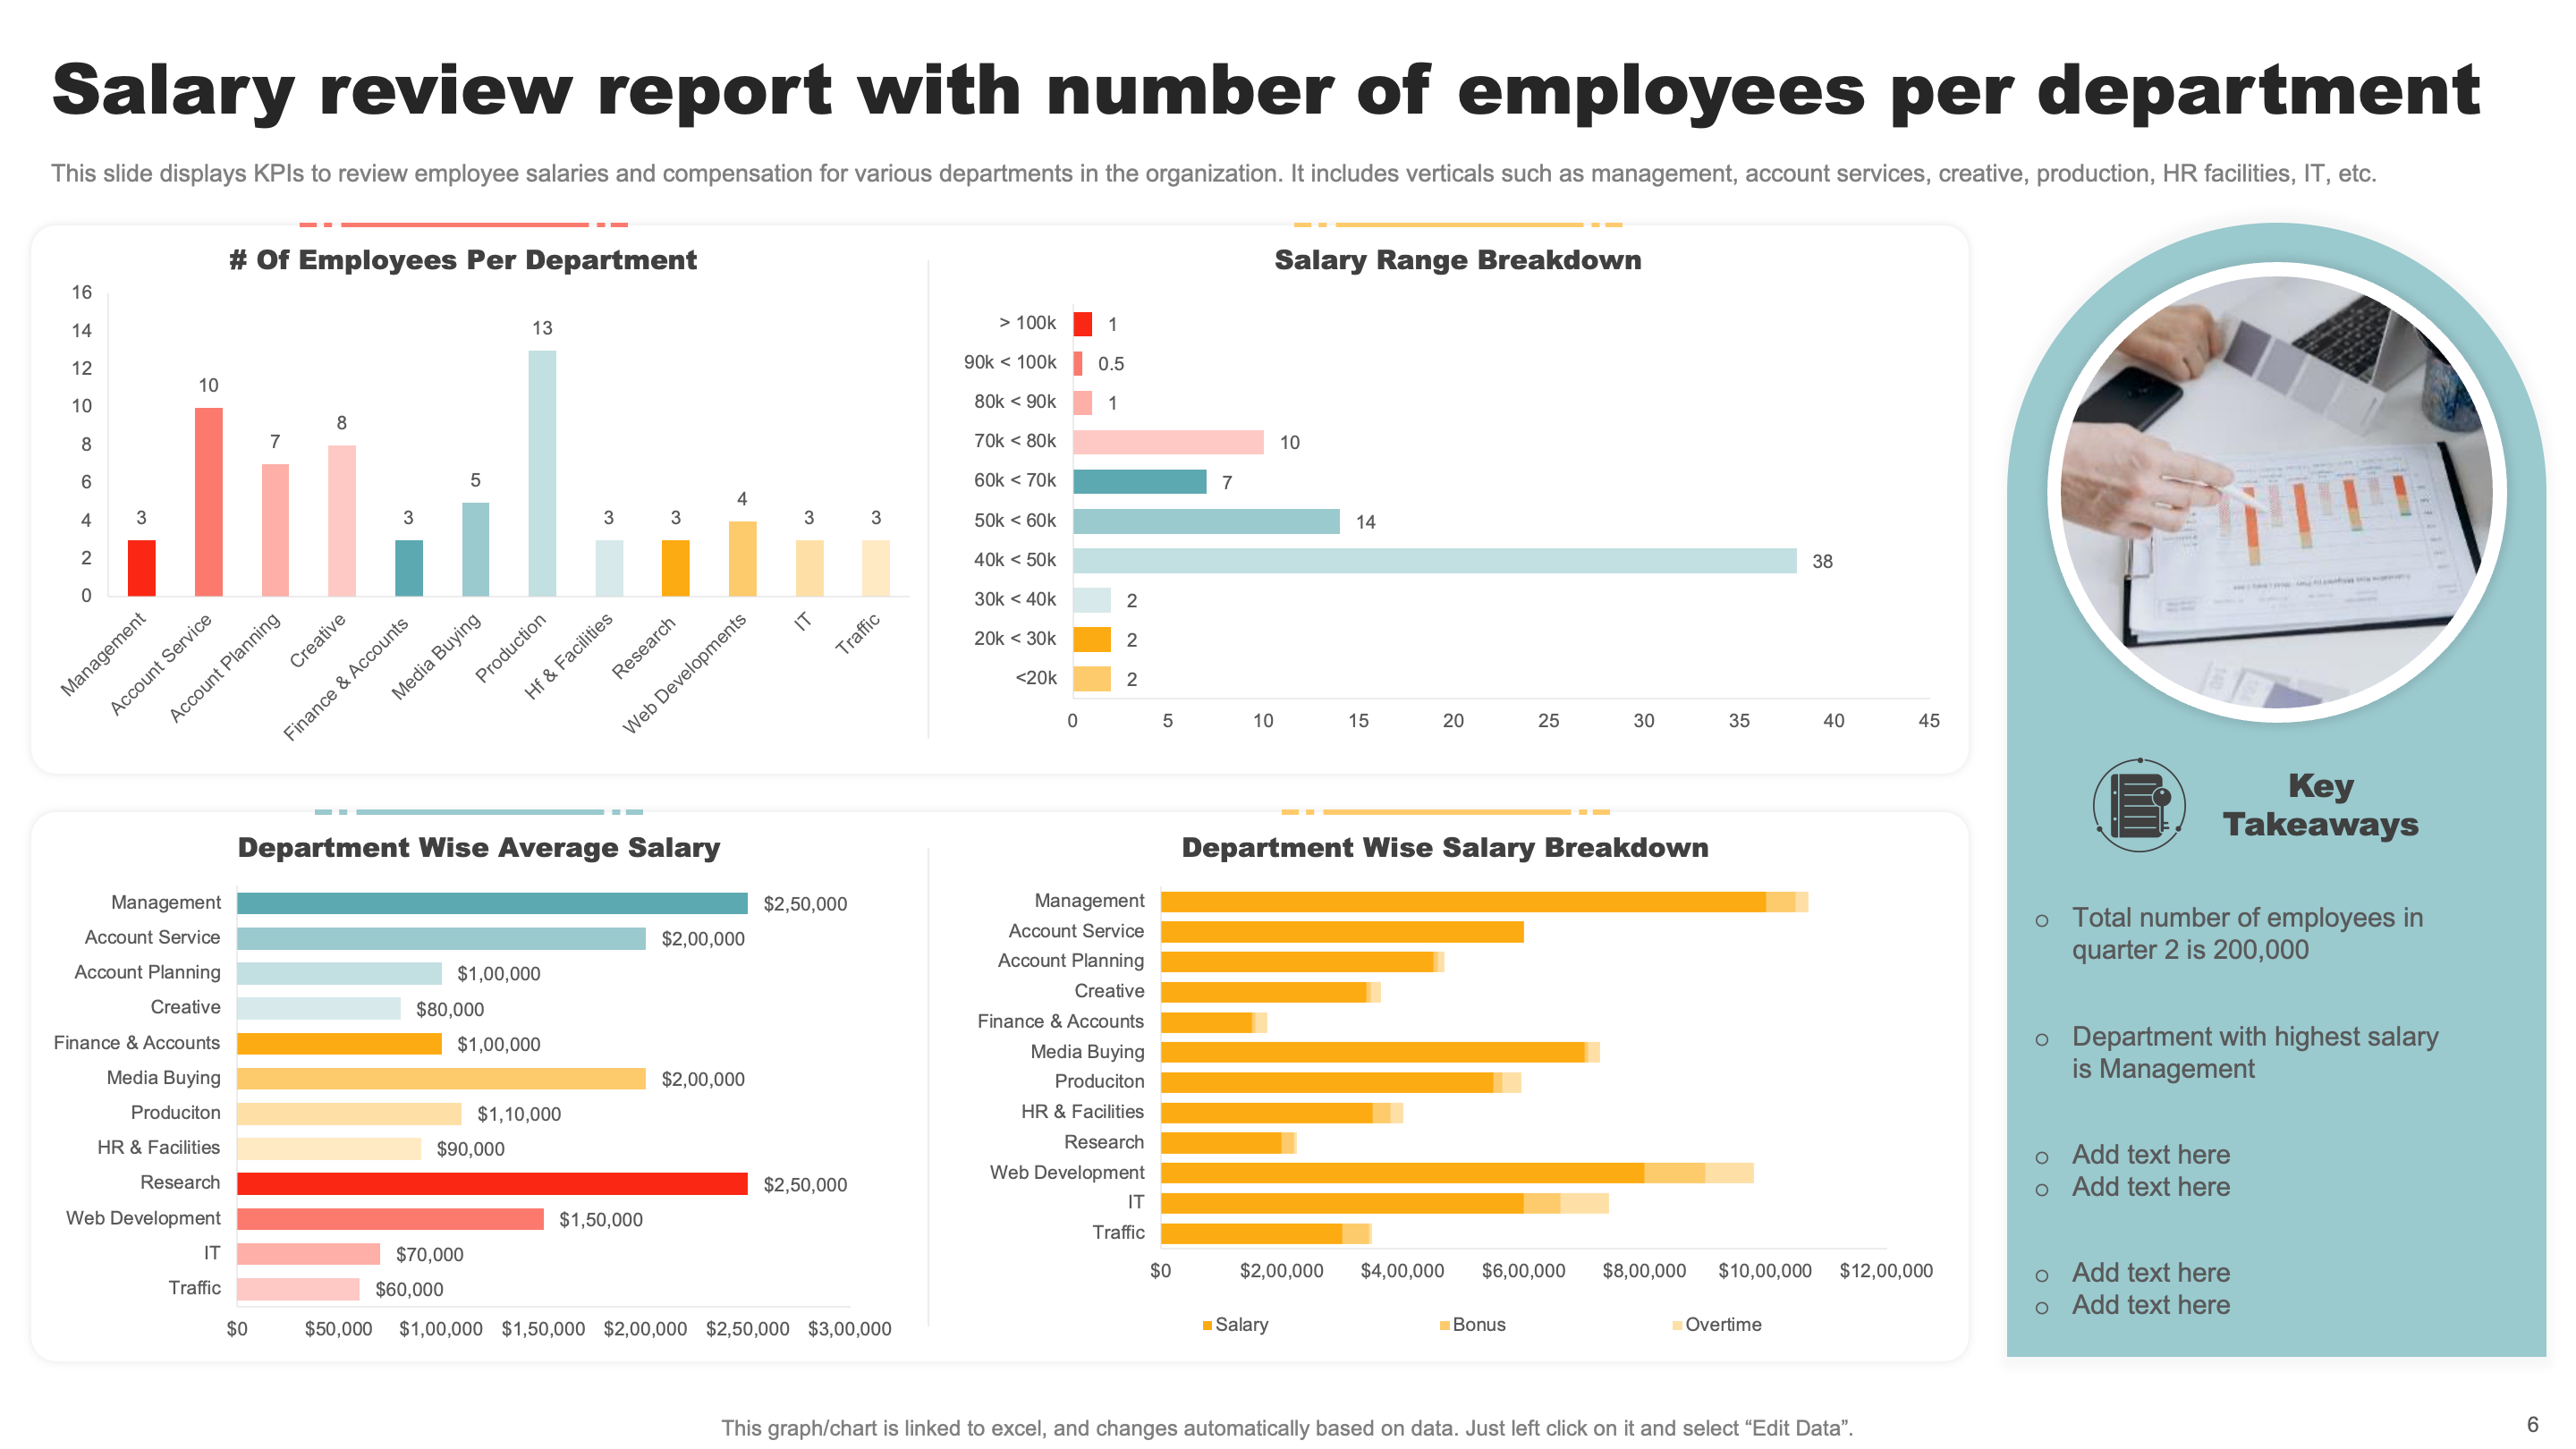 Salary Review Report with Number of Employees Per Department